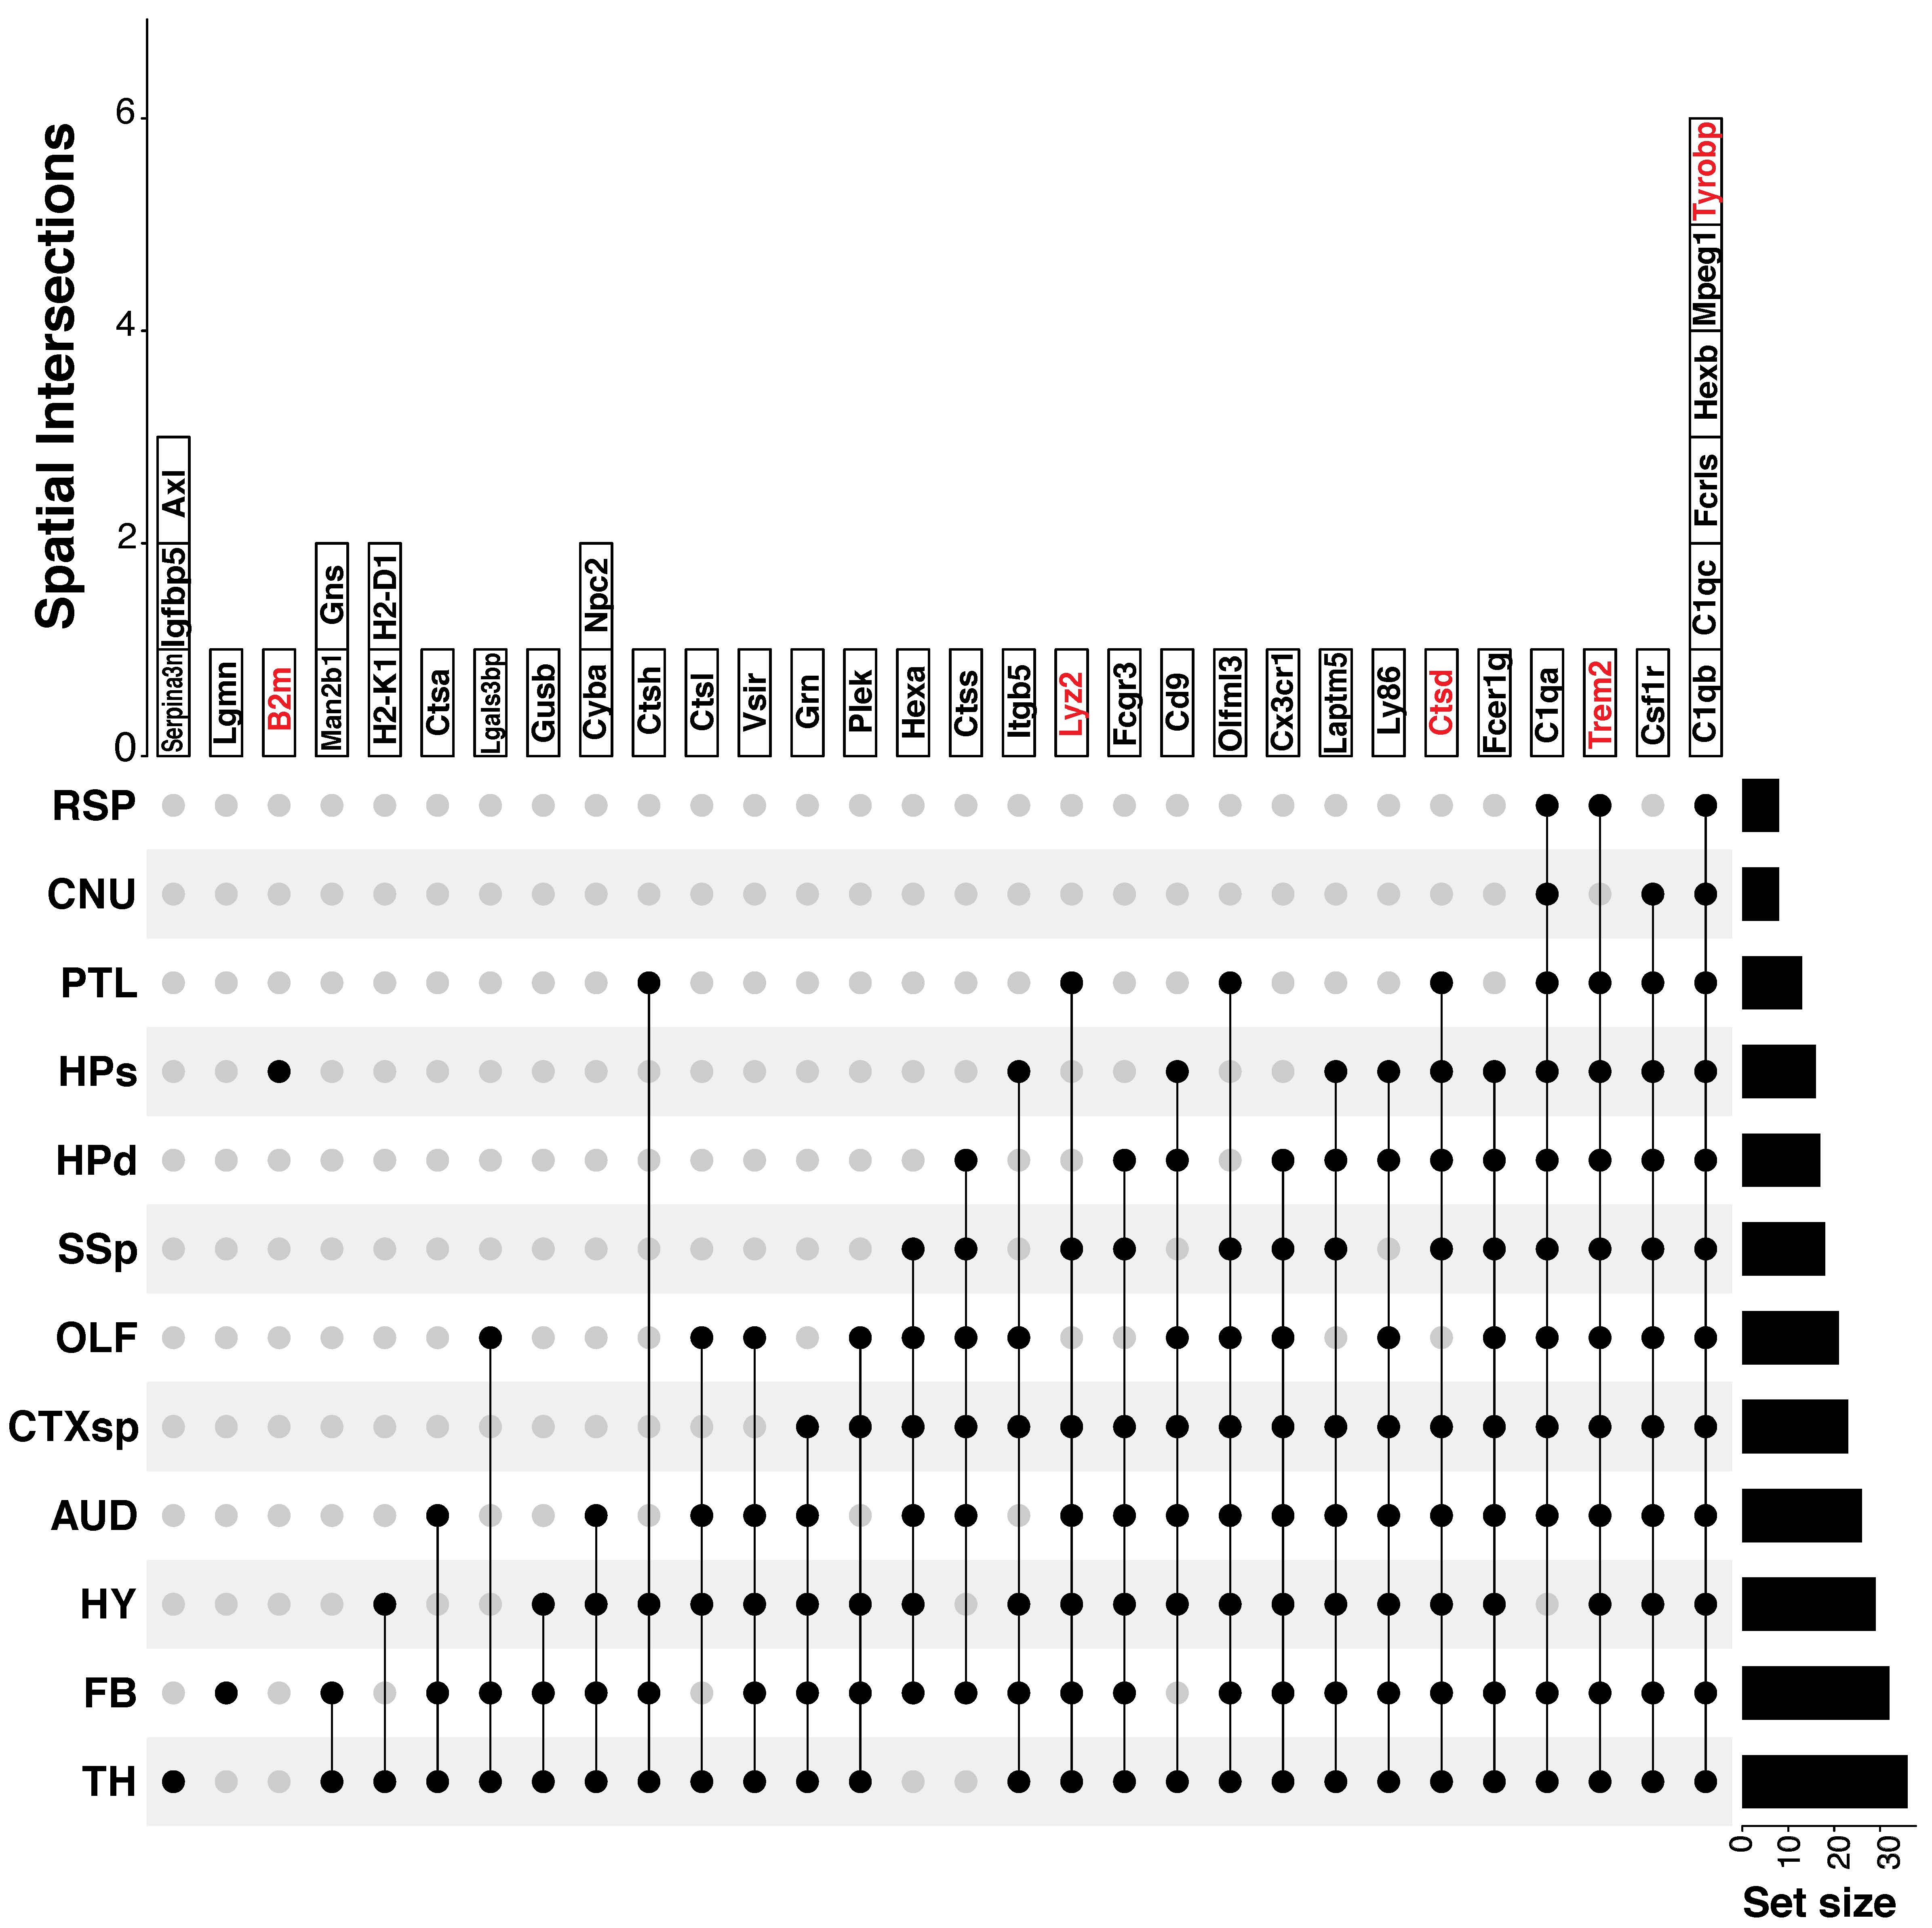 The upset plot shows hub genes for each tissue domain and different spatial intersections. The red colored hub genes are also detected as top hub genes in @CHEN2020976.